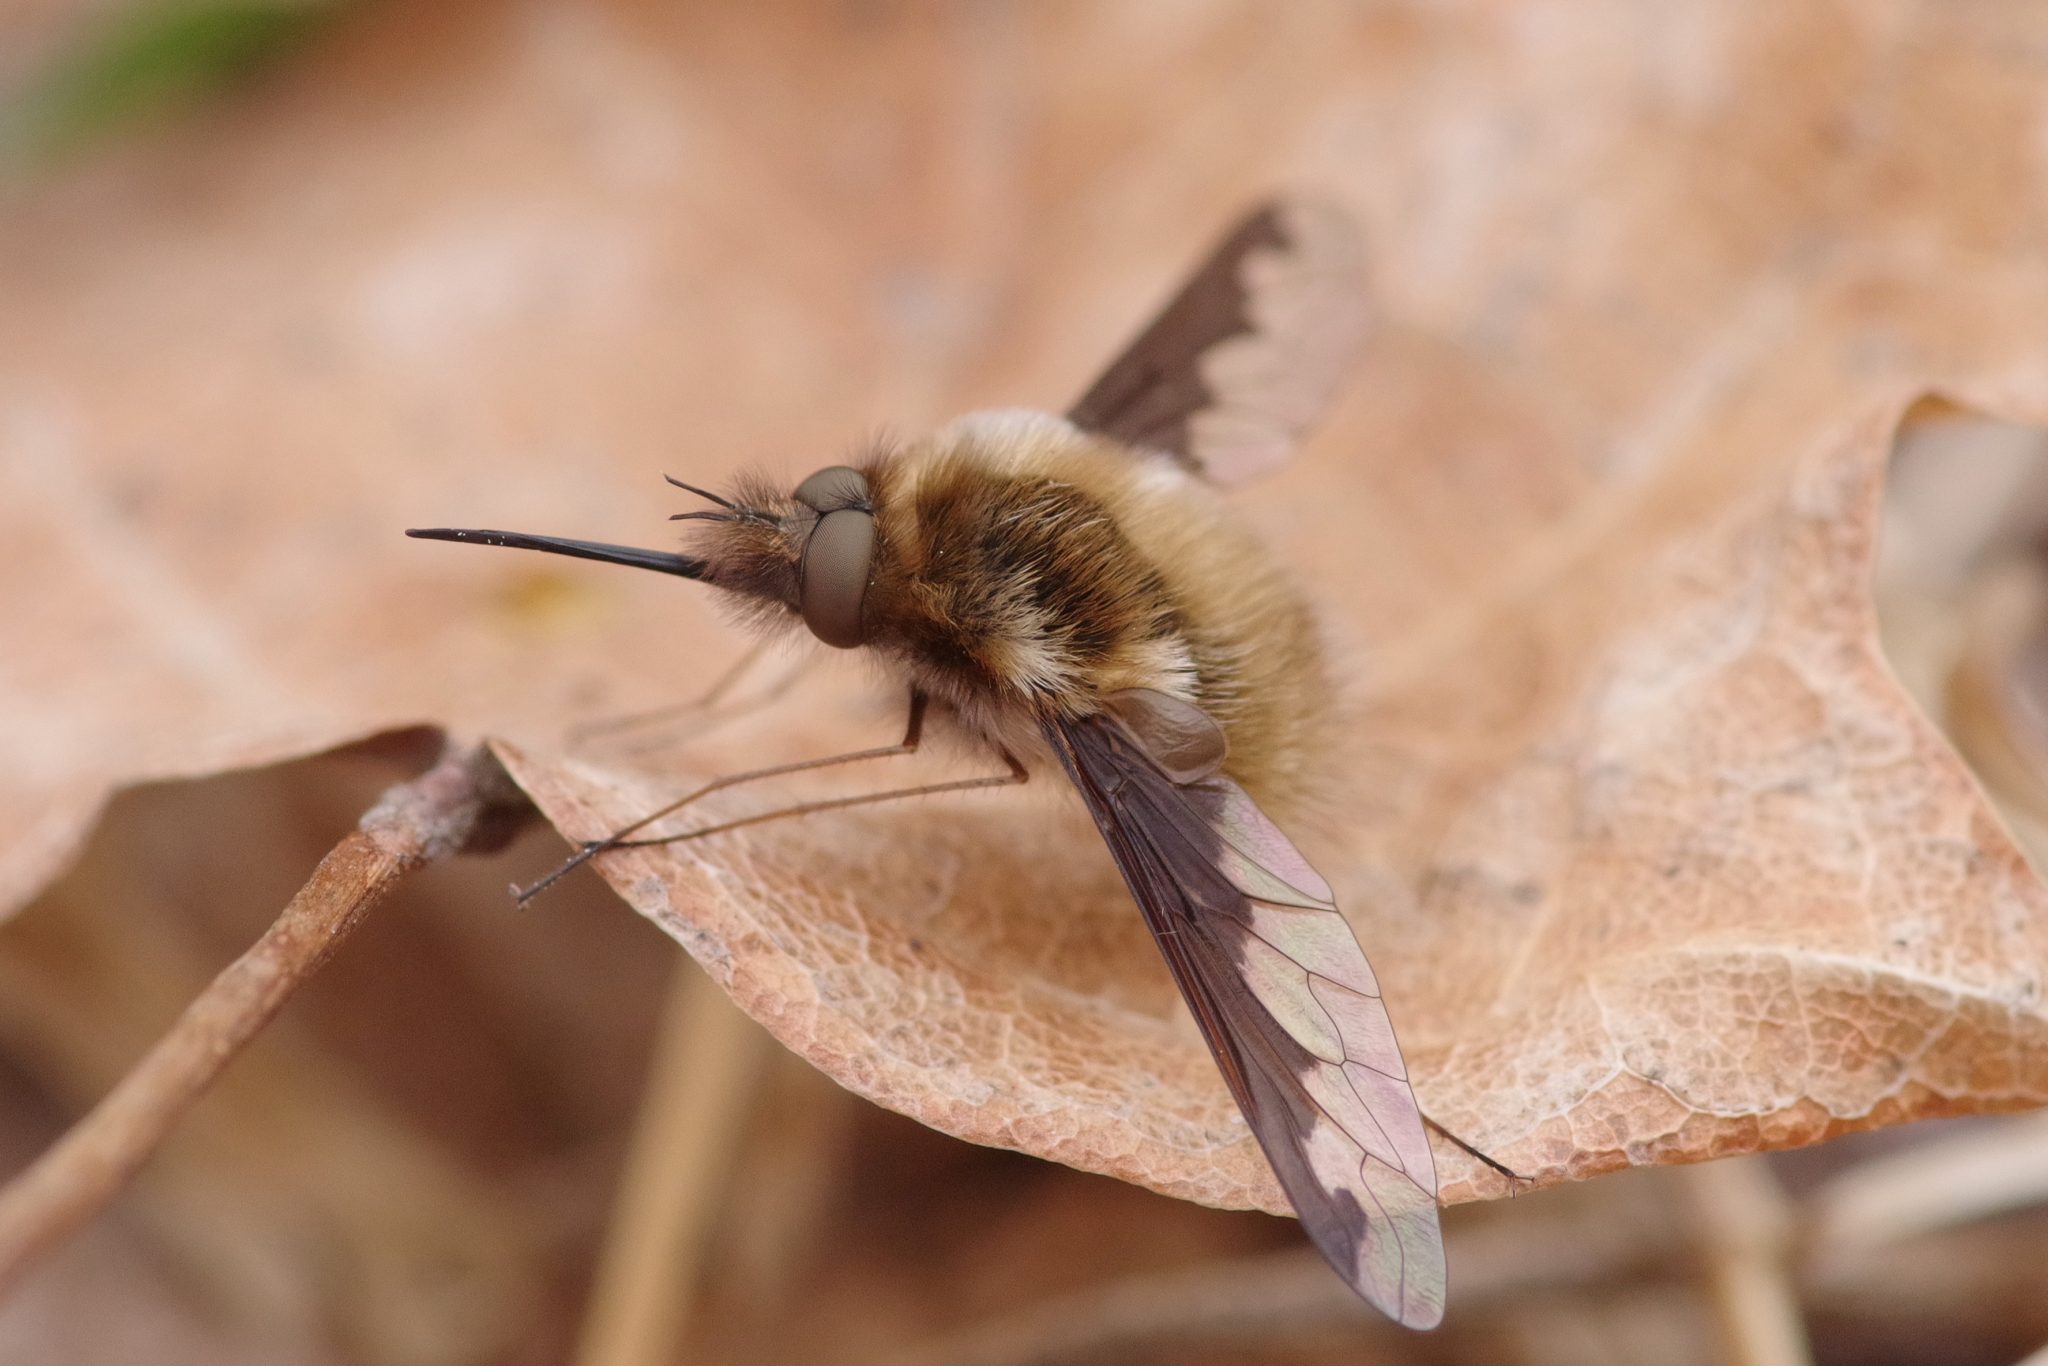 A bee fly on a leaf